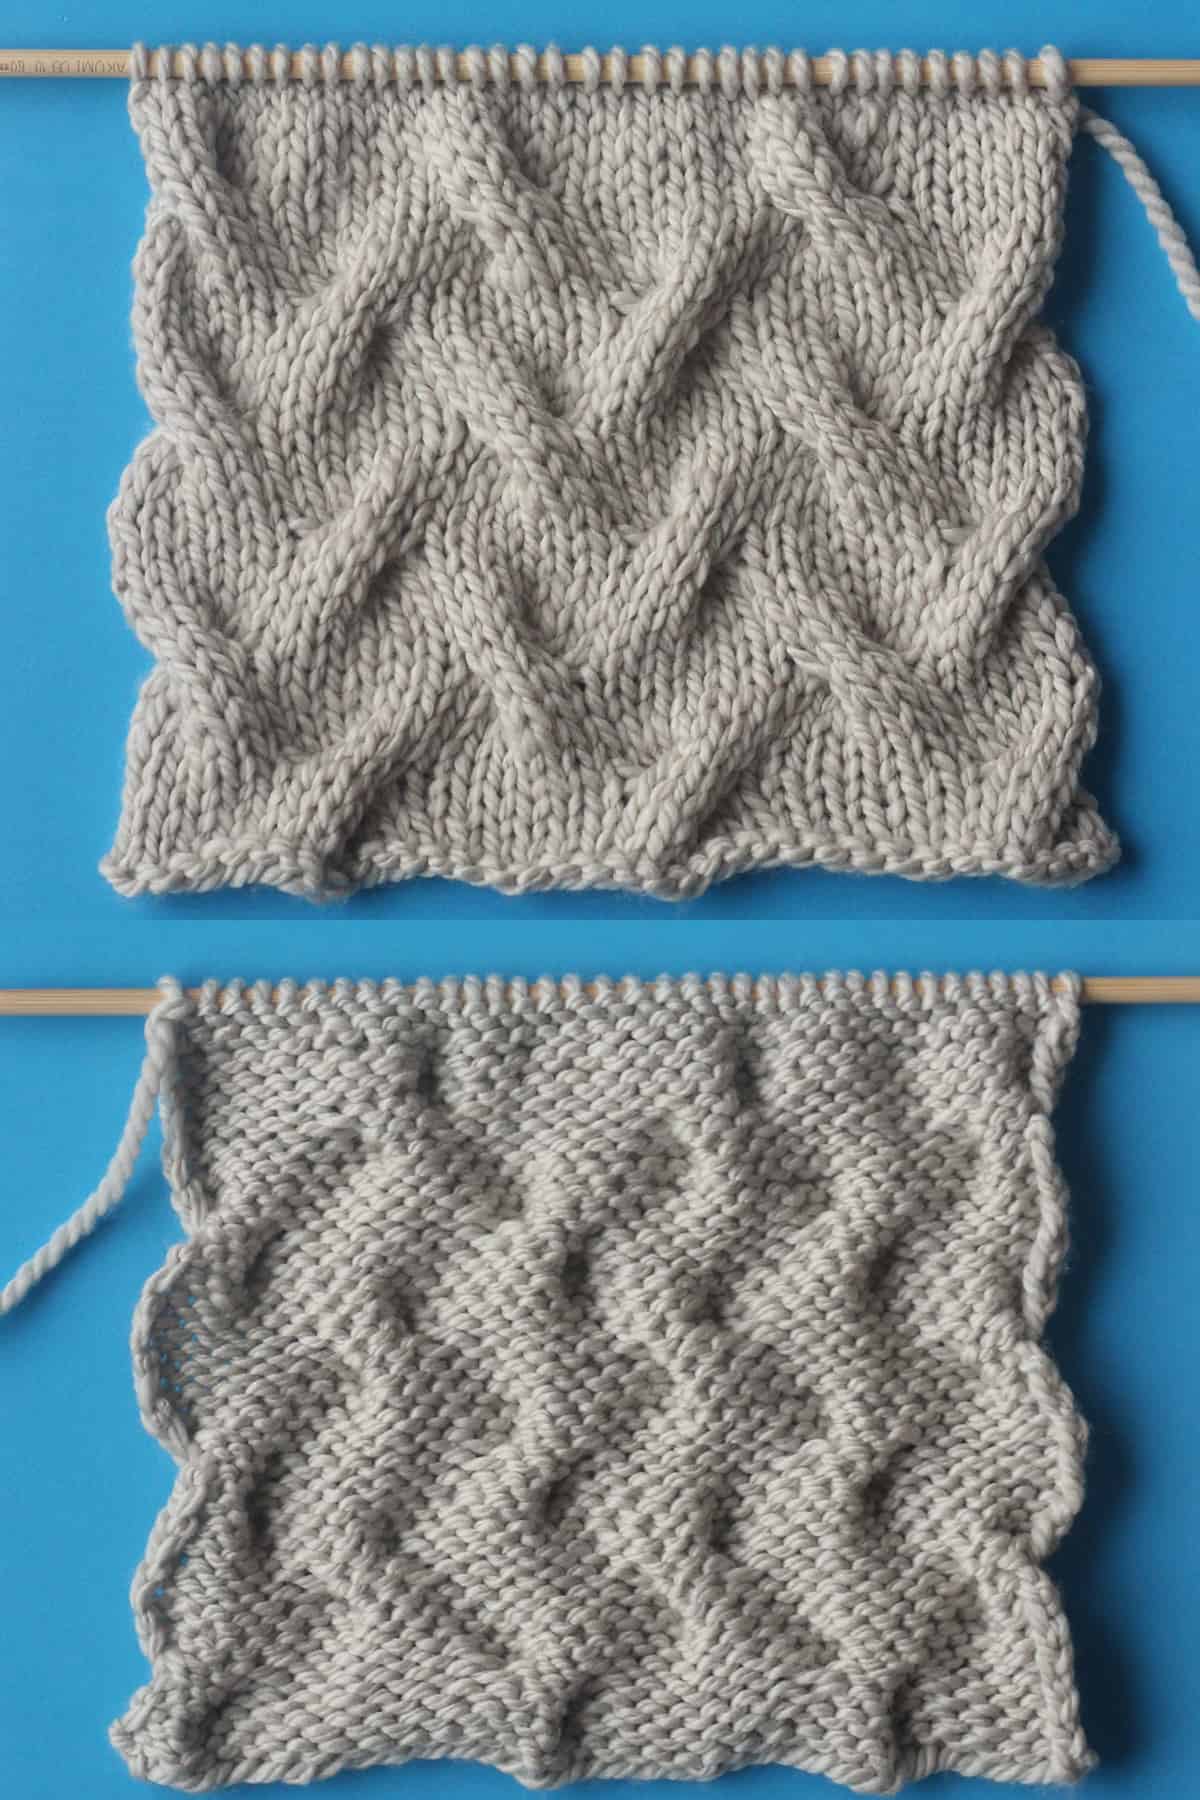 Right and wrong sides of Sand Cable knit stitch pattern knitted flat with a straight knitting needle in beige yarn color.